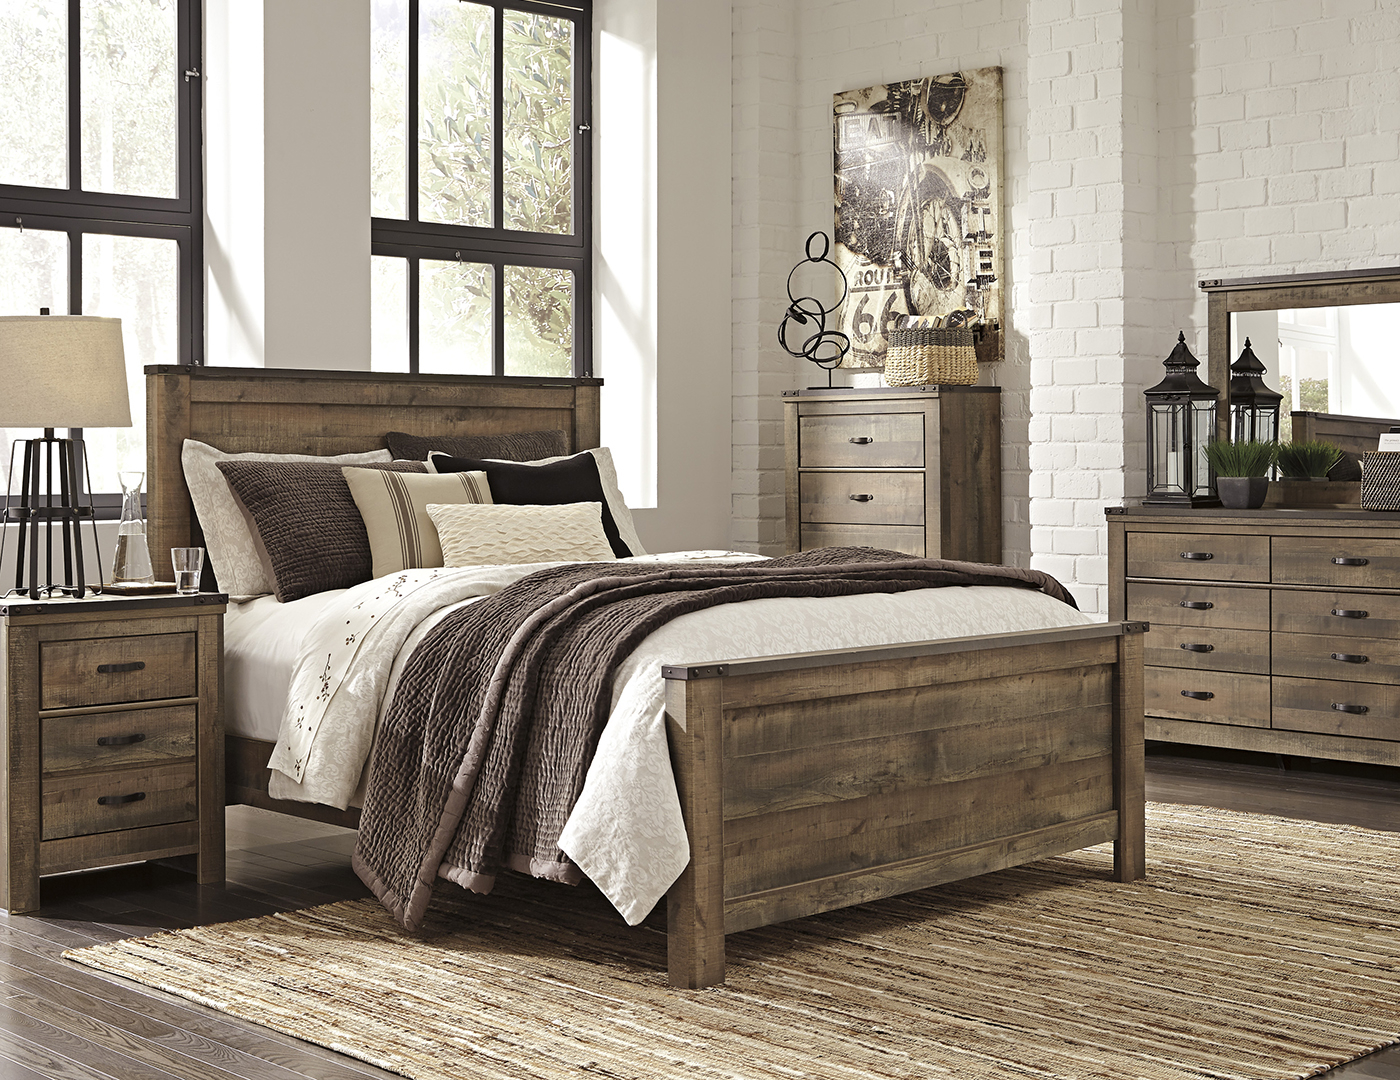 Trinell 5 Pc King Bedroom Set pertaining to measurements 1400 X 1080